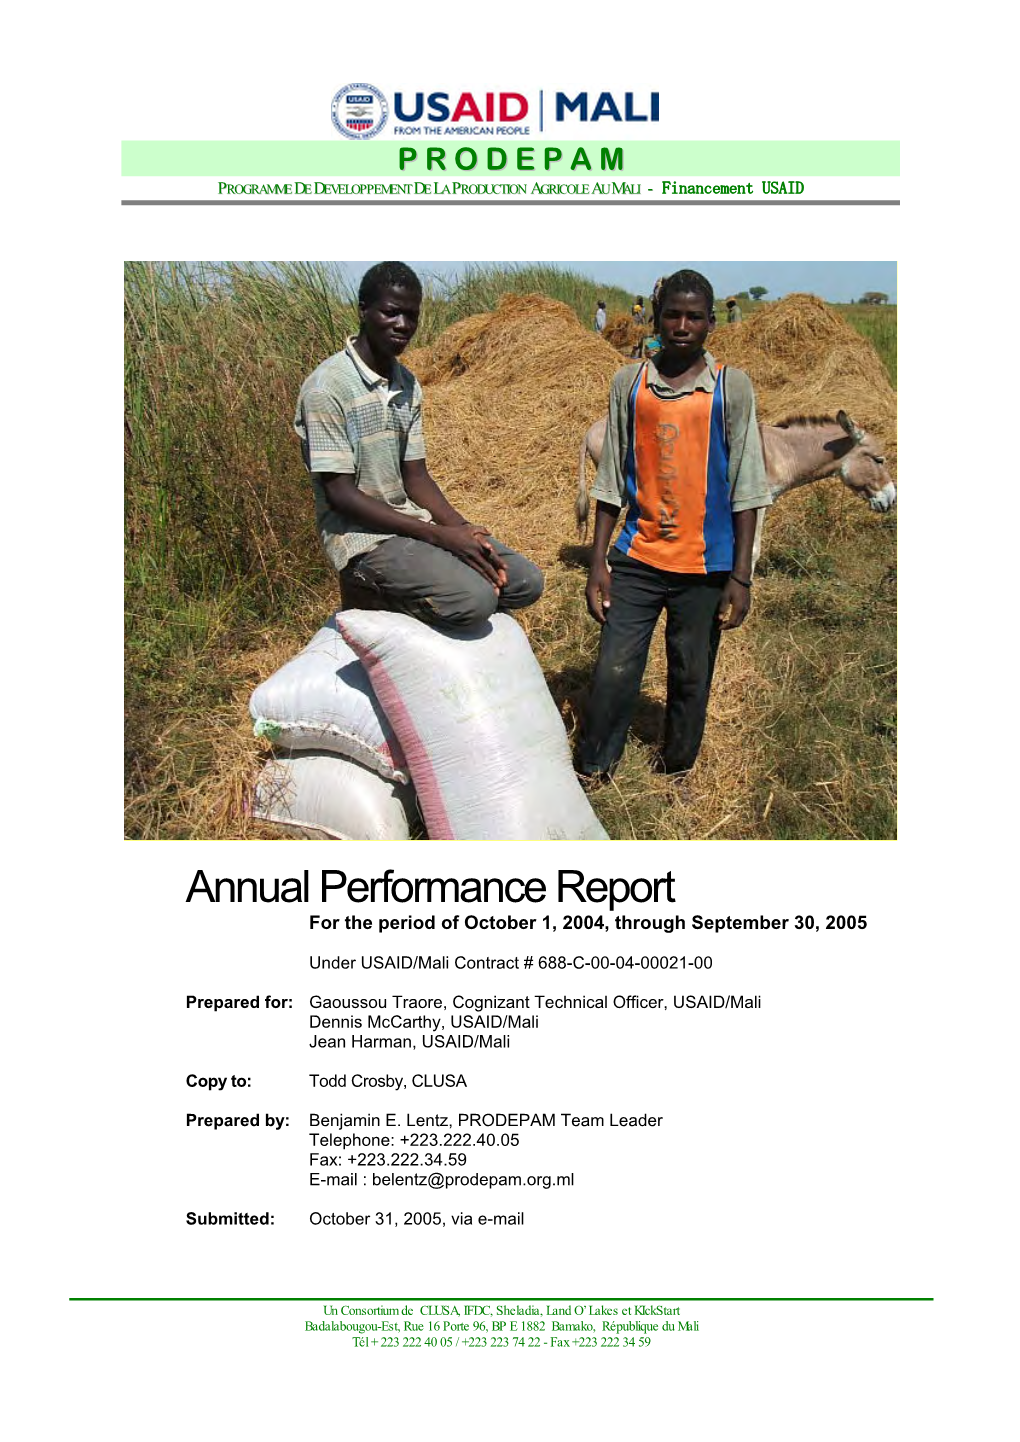 Annual Performance Report for the Period of October 1, 2004, Through September 30, 2005